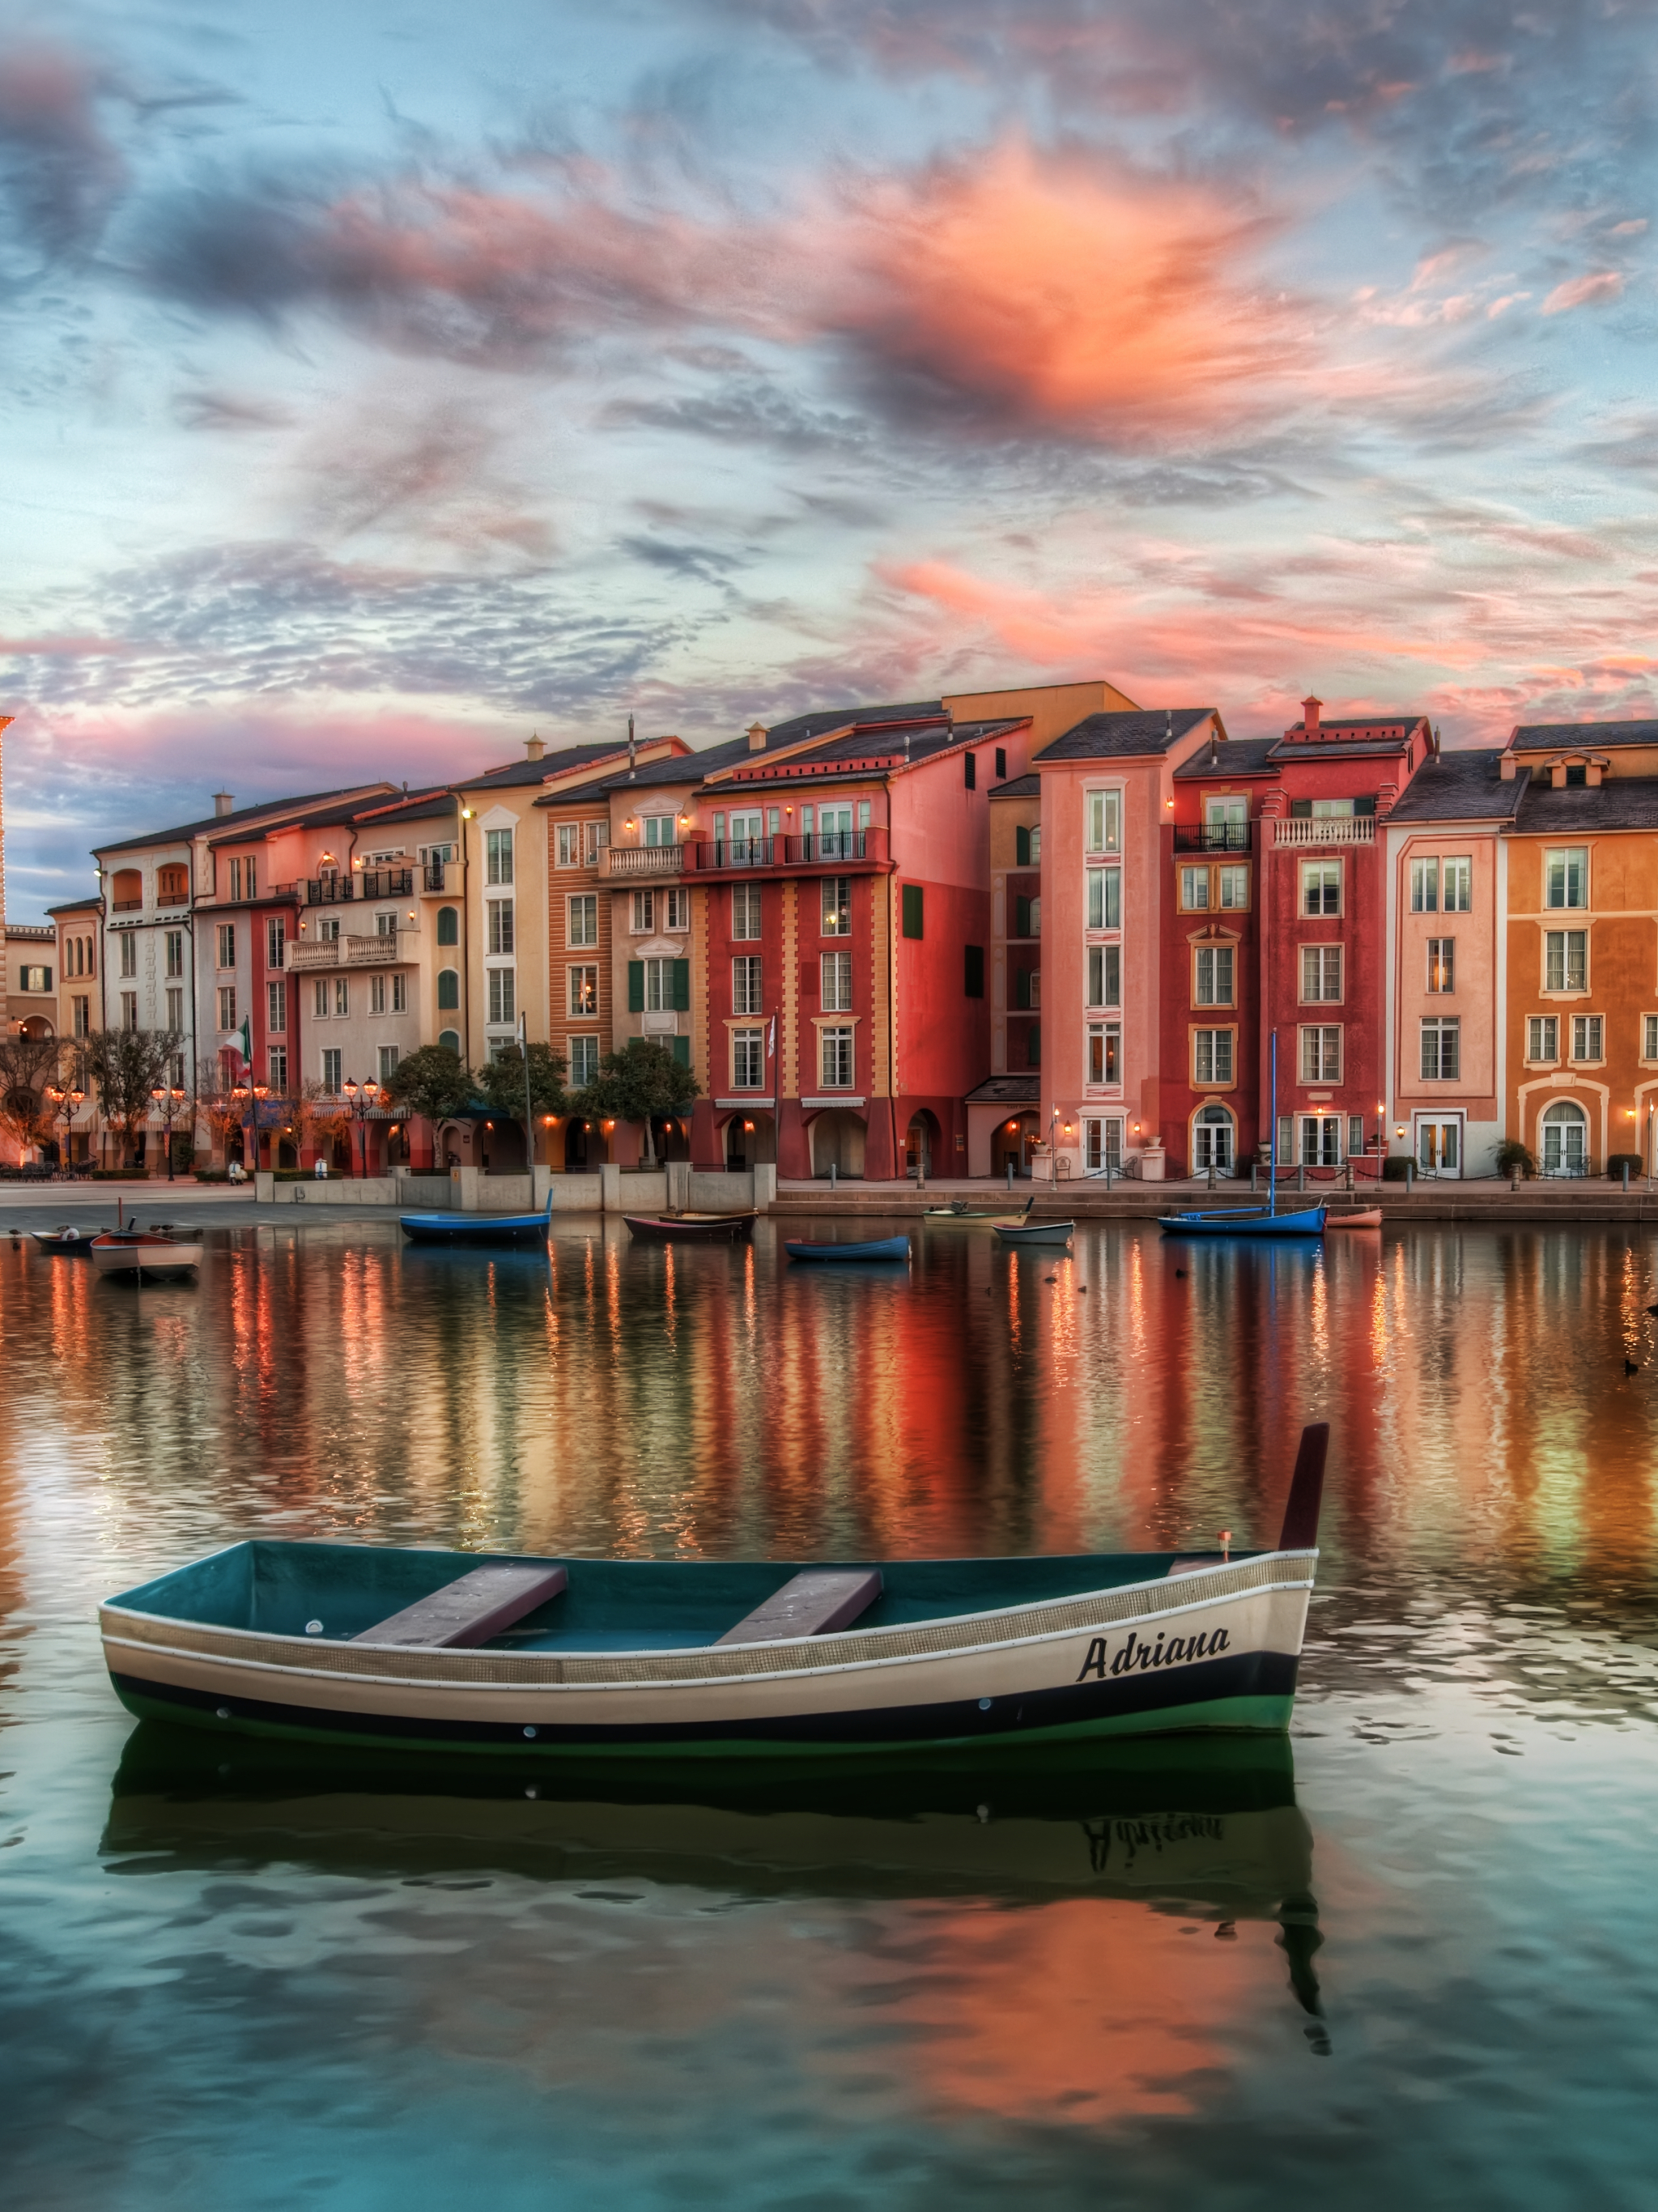 man made, town, boat, florida, hdr, orlando, building, house, towns